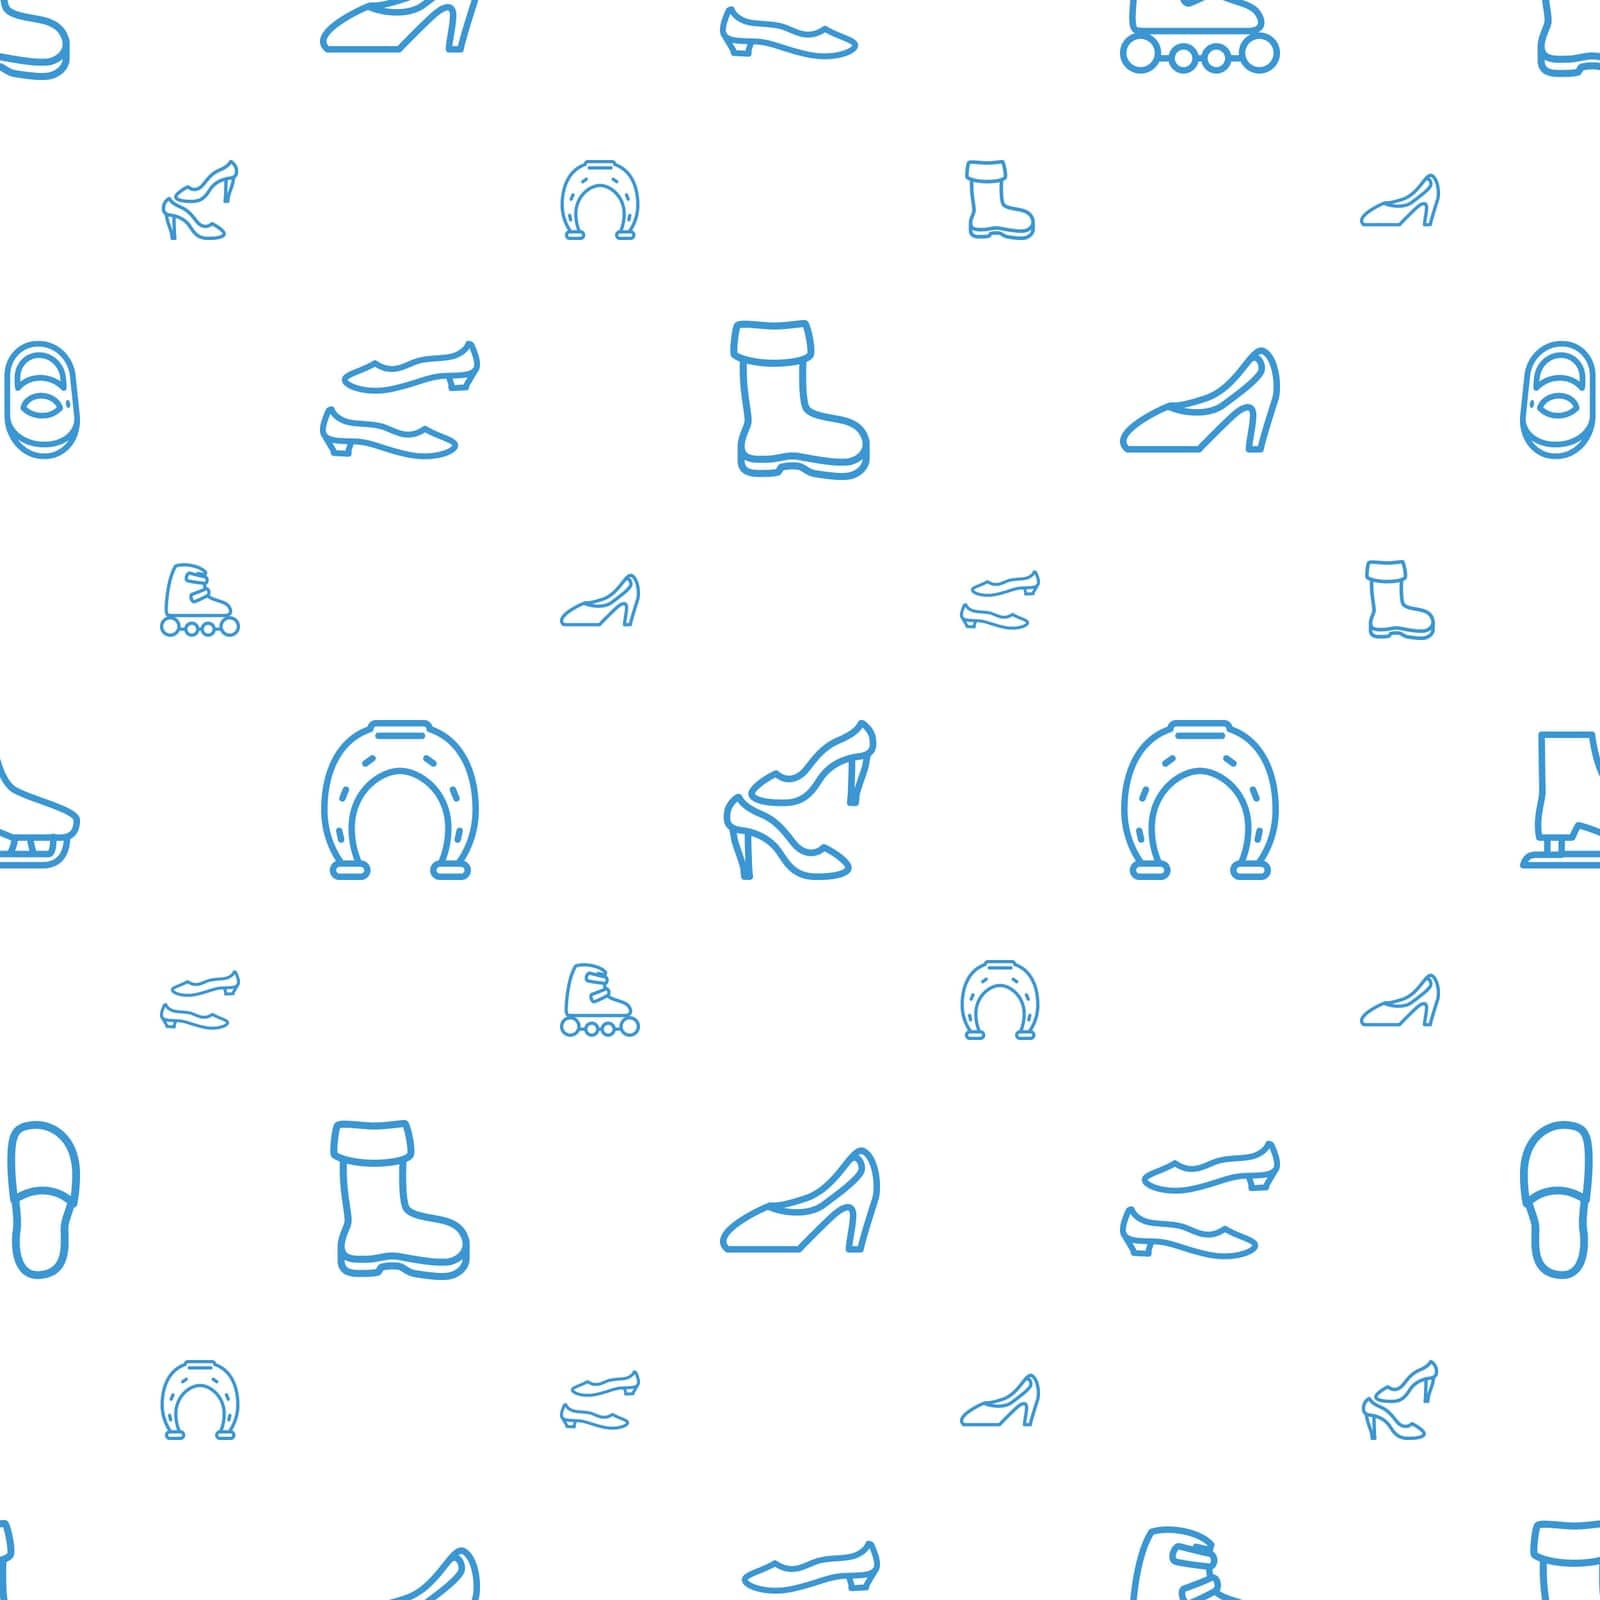 symbol,woman,activity,pattern,icon,sign,isolated,ice,high,white,heel,flat,design,vector,female,boot,rollers,graphic,shoe,elegant,foot,element,footwear,art,set,shape,slippers,black,girl,shoes,horseshoe,background,baby,style,illustration,skate,roller,object,fashion,women by ogqcorp